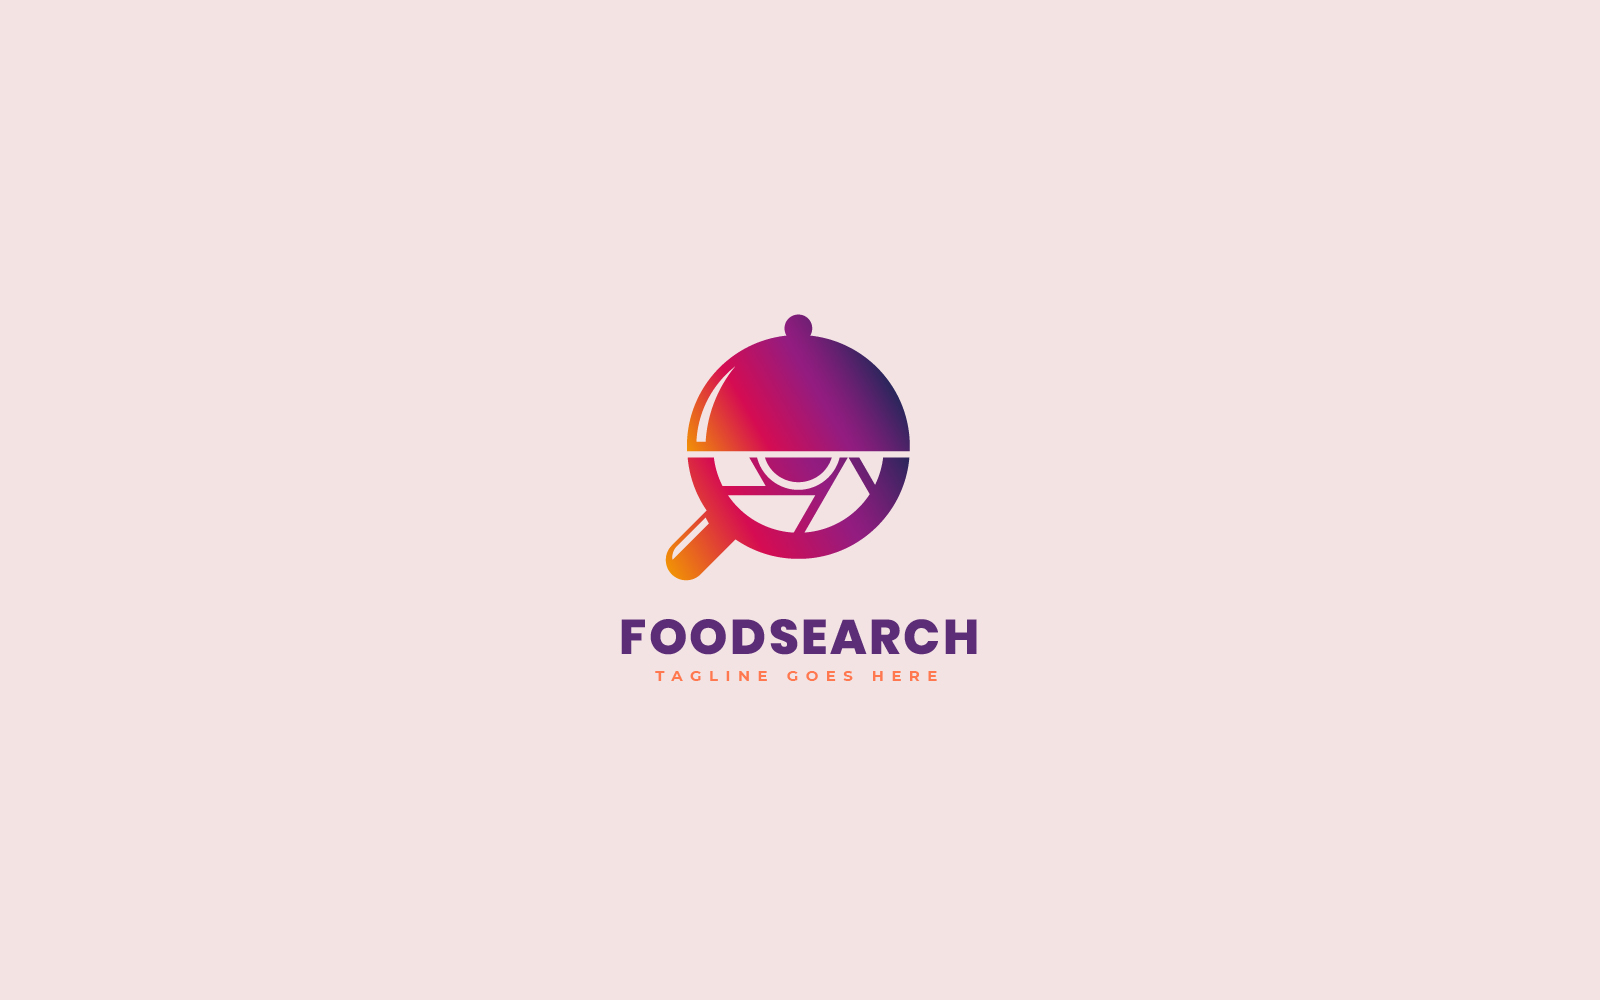 Food Search App Logo Template in Gradient